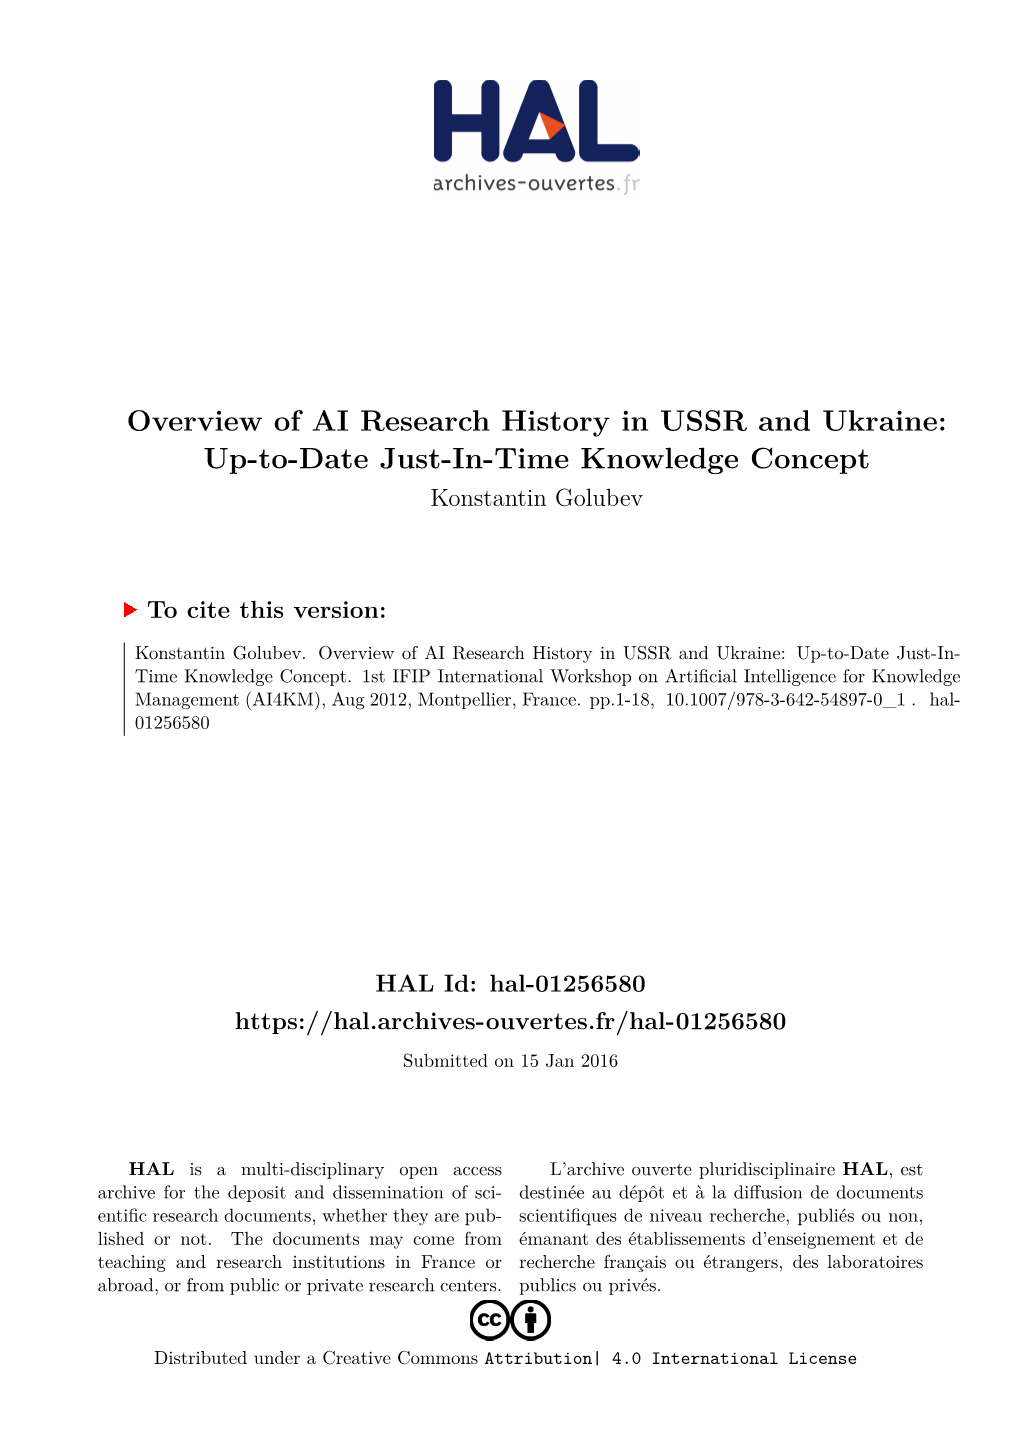 Overview of AI Research History in USSR and Ukraine: Up-To-Date Just-In-Time Knowledge Concept Konstantin Golubev